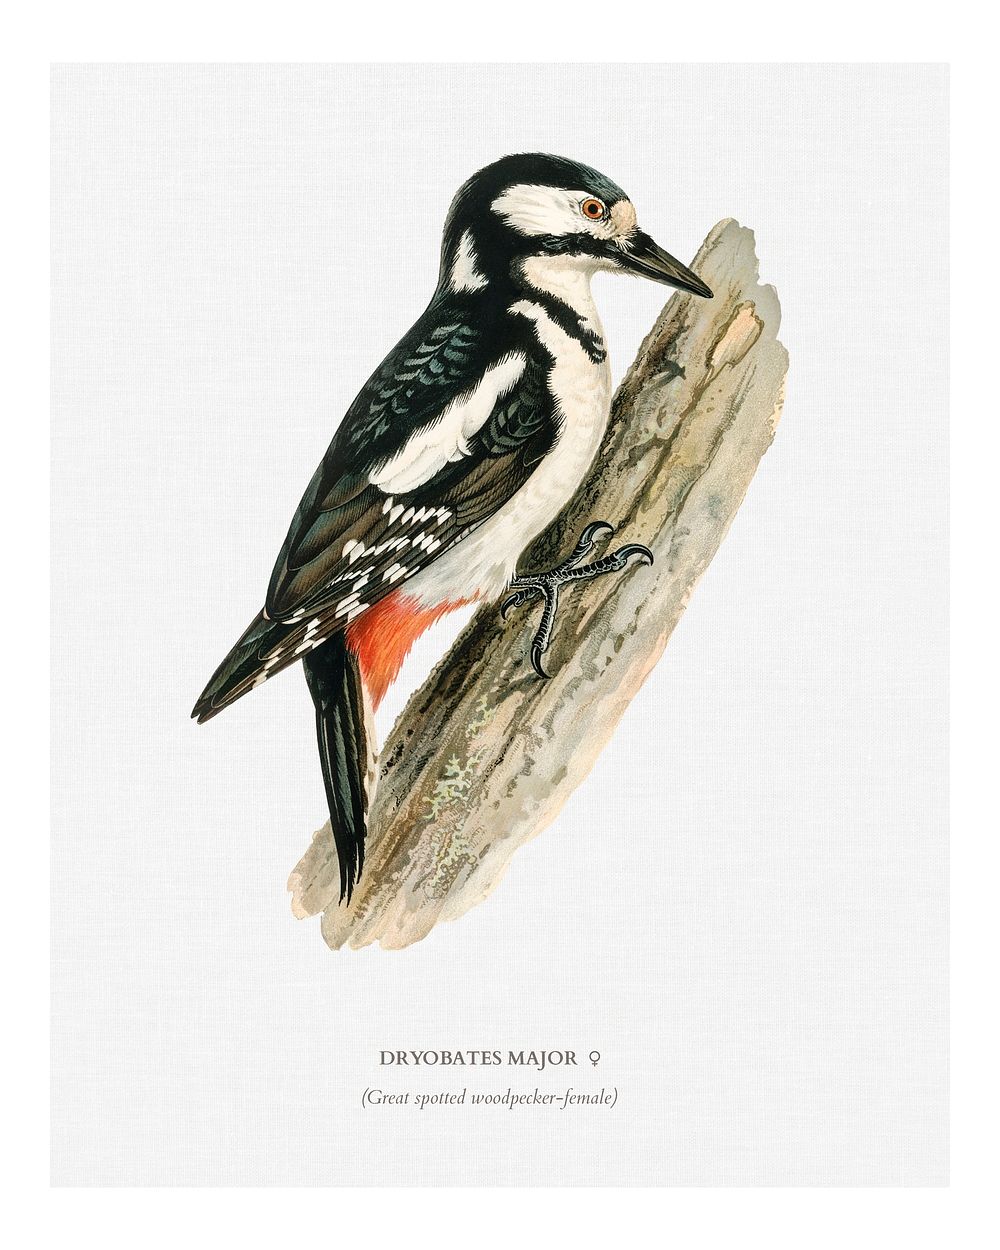 Great spotted woodpecker-female  (Dryobates major) illustration wall art print and poster.